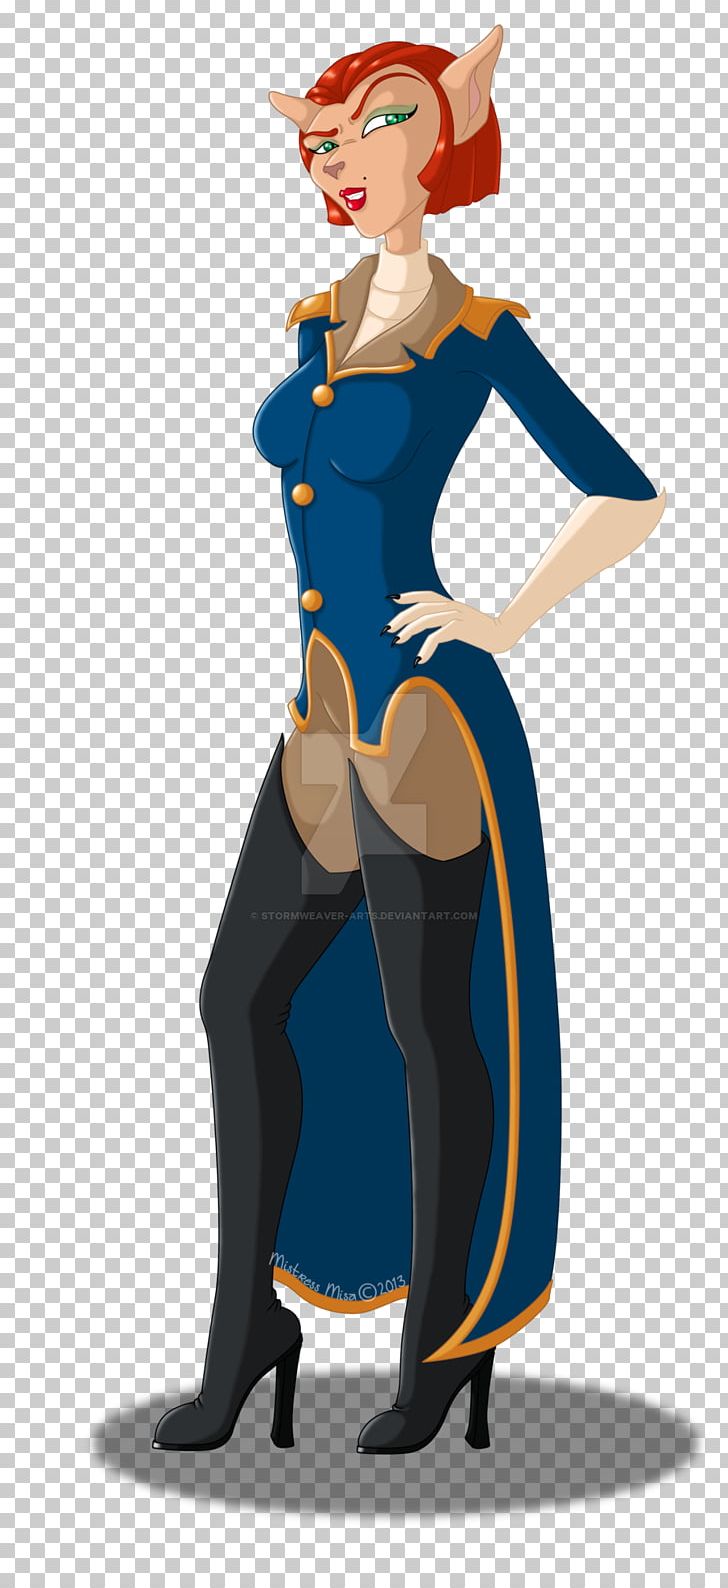 Captain Amelia Character Art YouTube PNG, Clipart, Amelia, Art, Captain, Captain Amelia, Character Free PNG Download